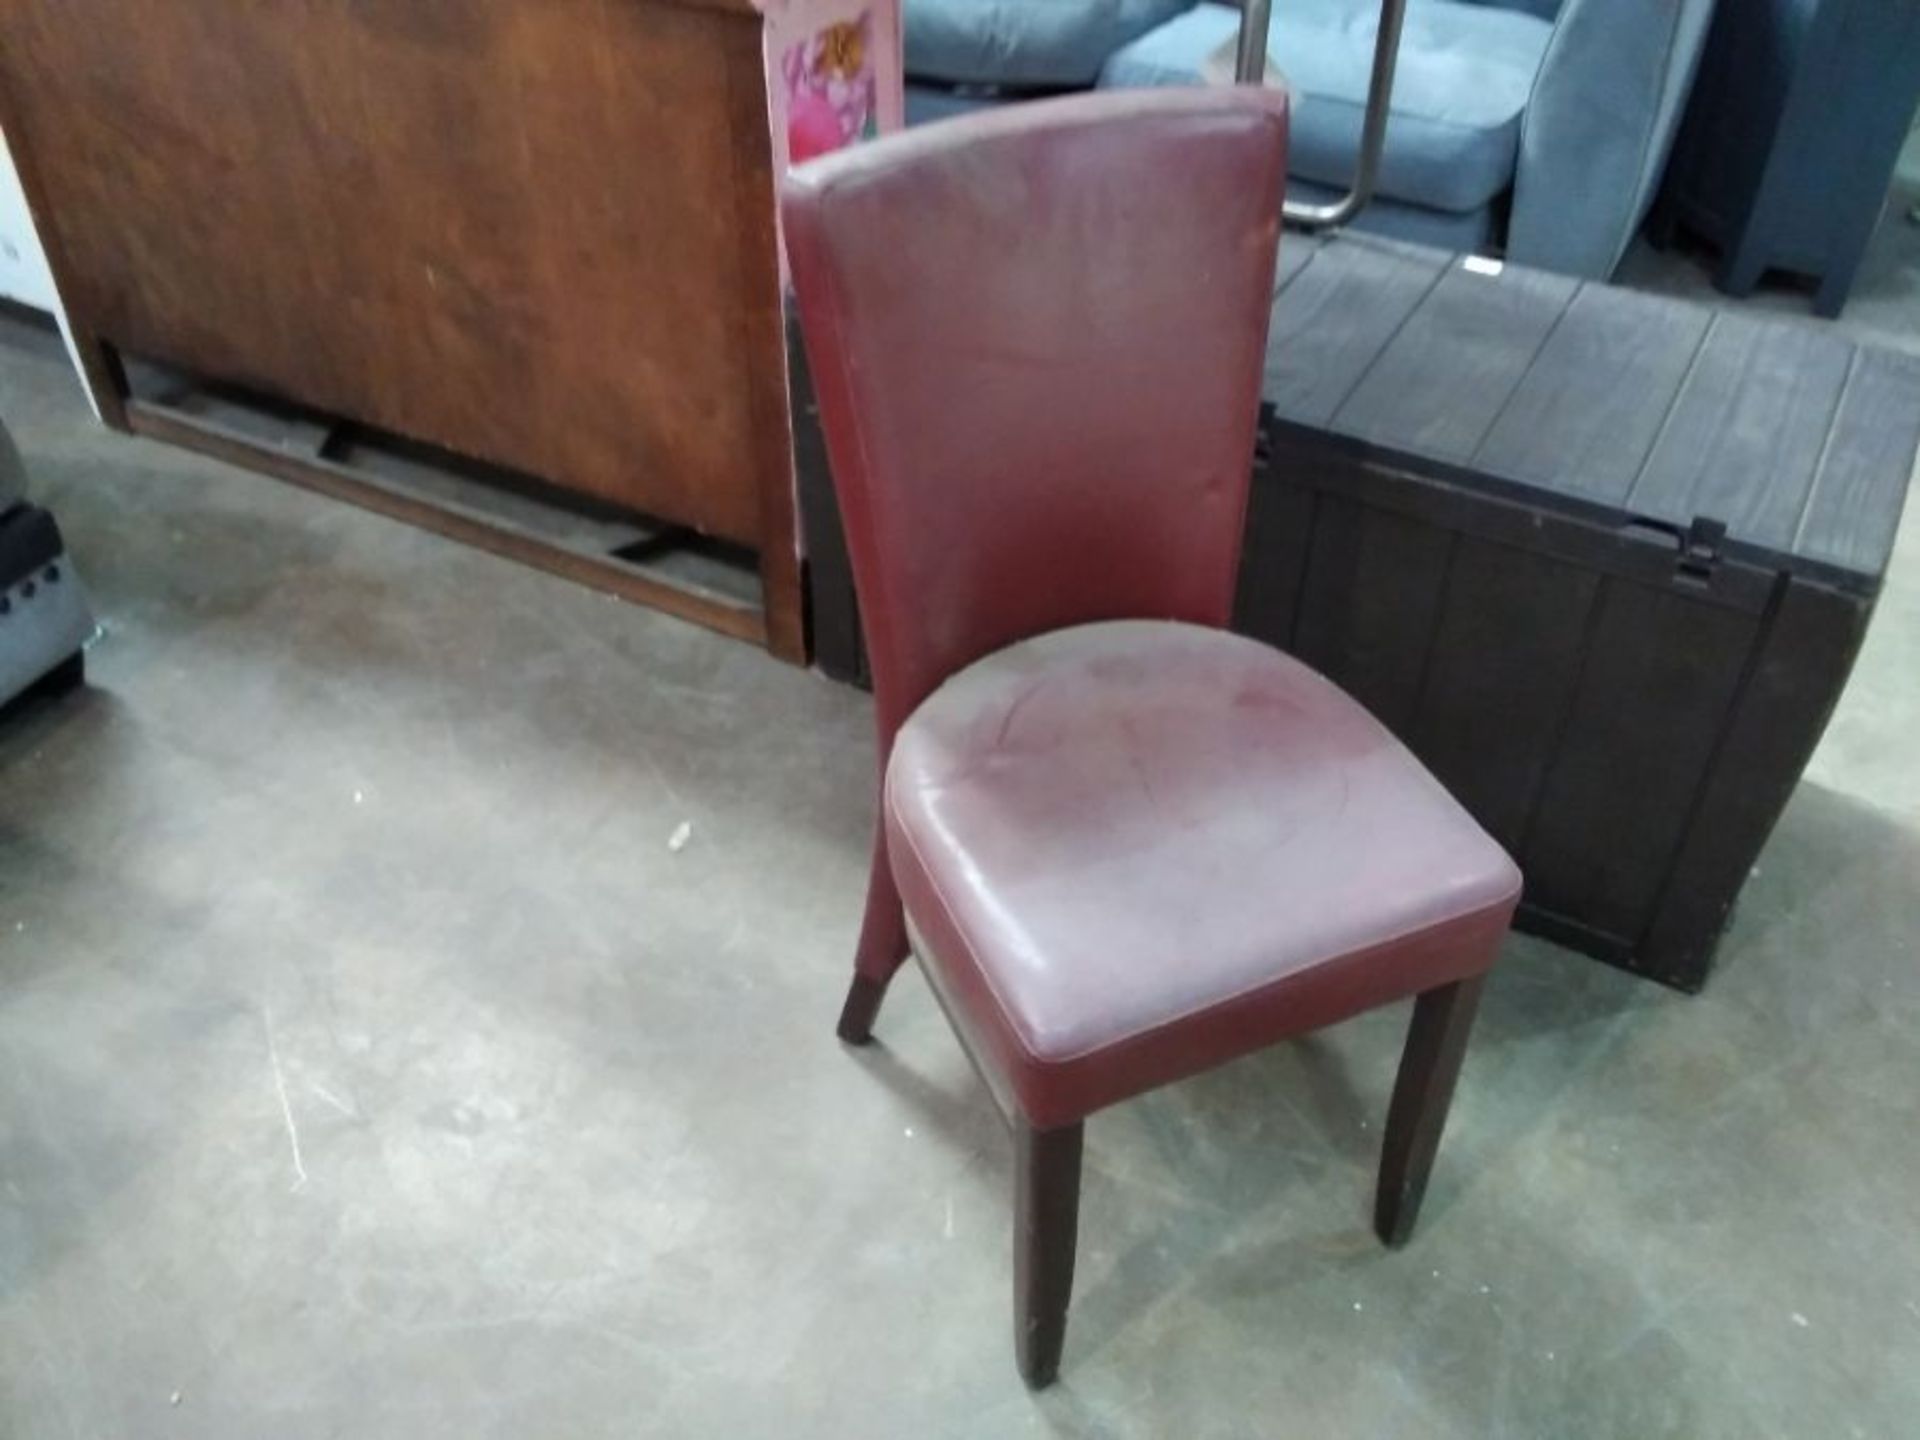 RED FAUX LEATHER CHAIR (DAMAGED)